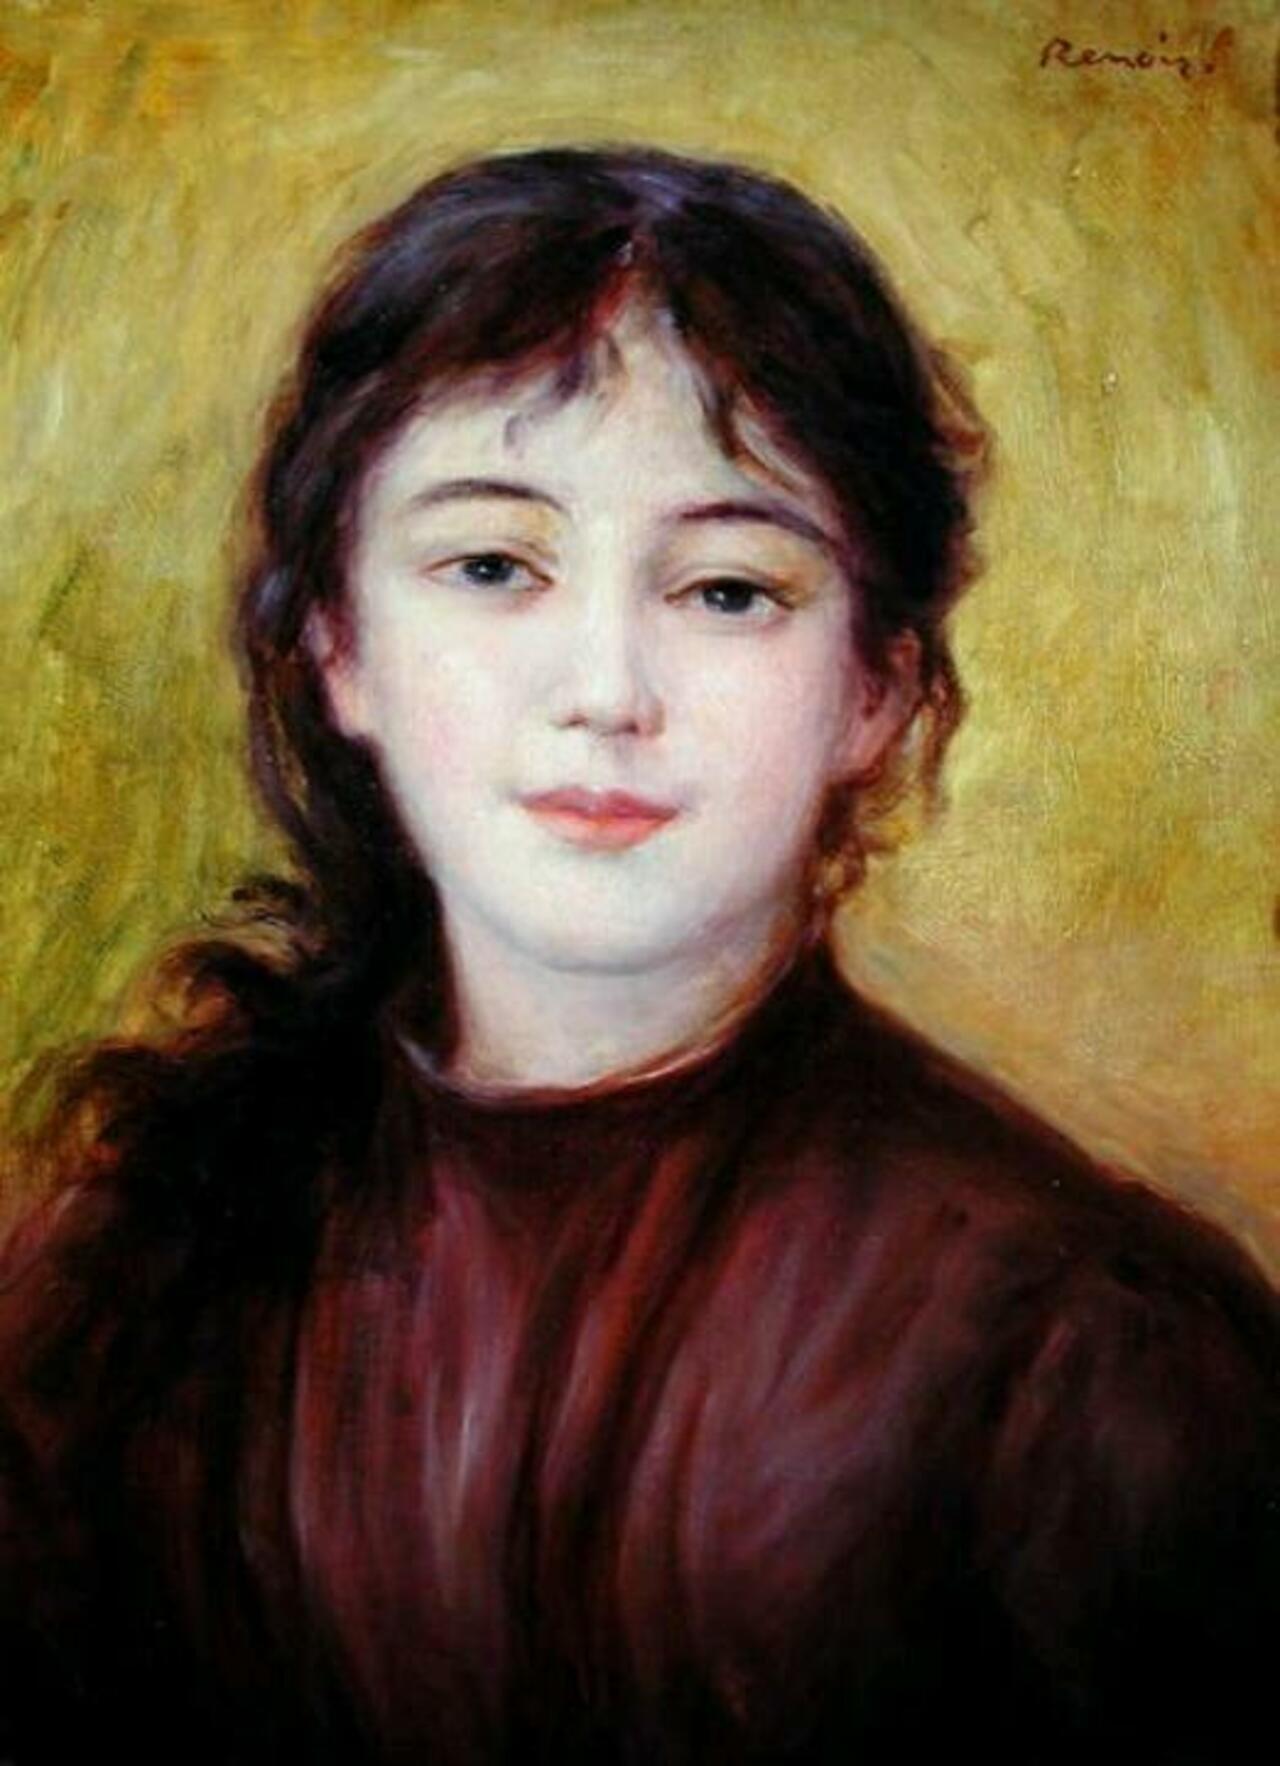 Muchacha - Renoir #art #painting http://t.co/10iG5cRE4I